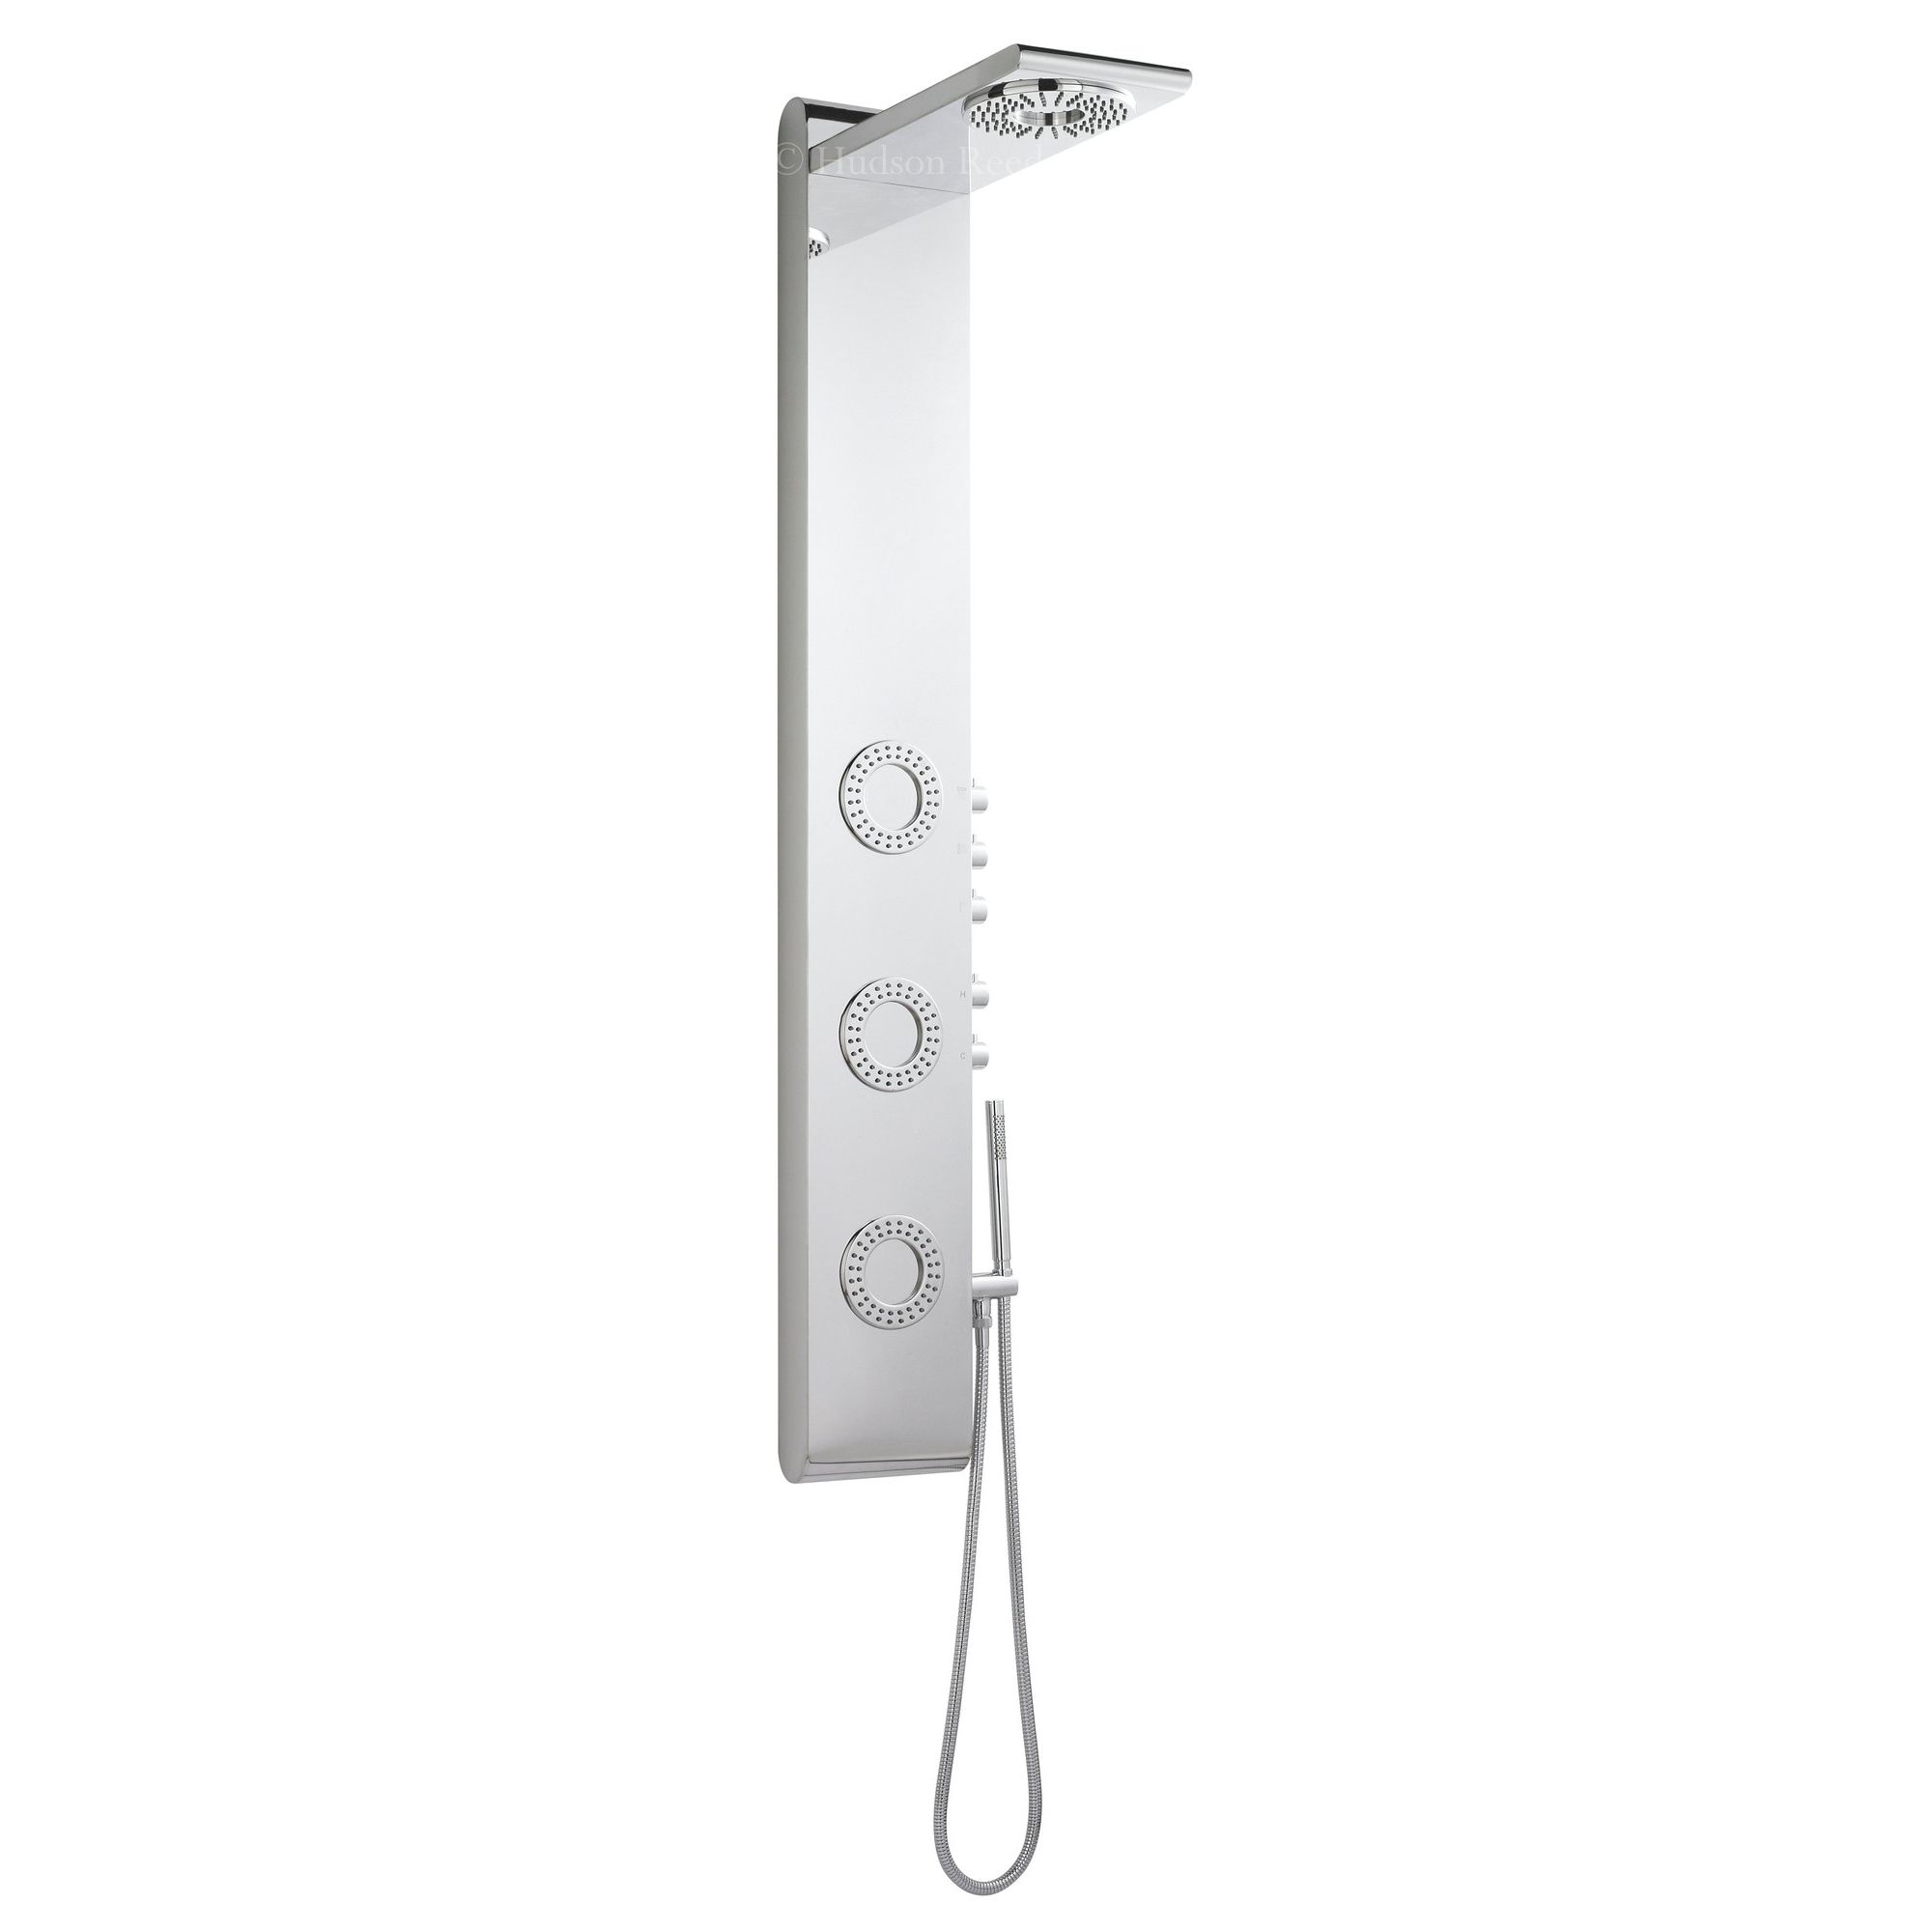 Hudson Reed Pluo Thermostatic Shower Panel at Tesco Direct